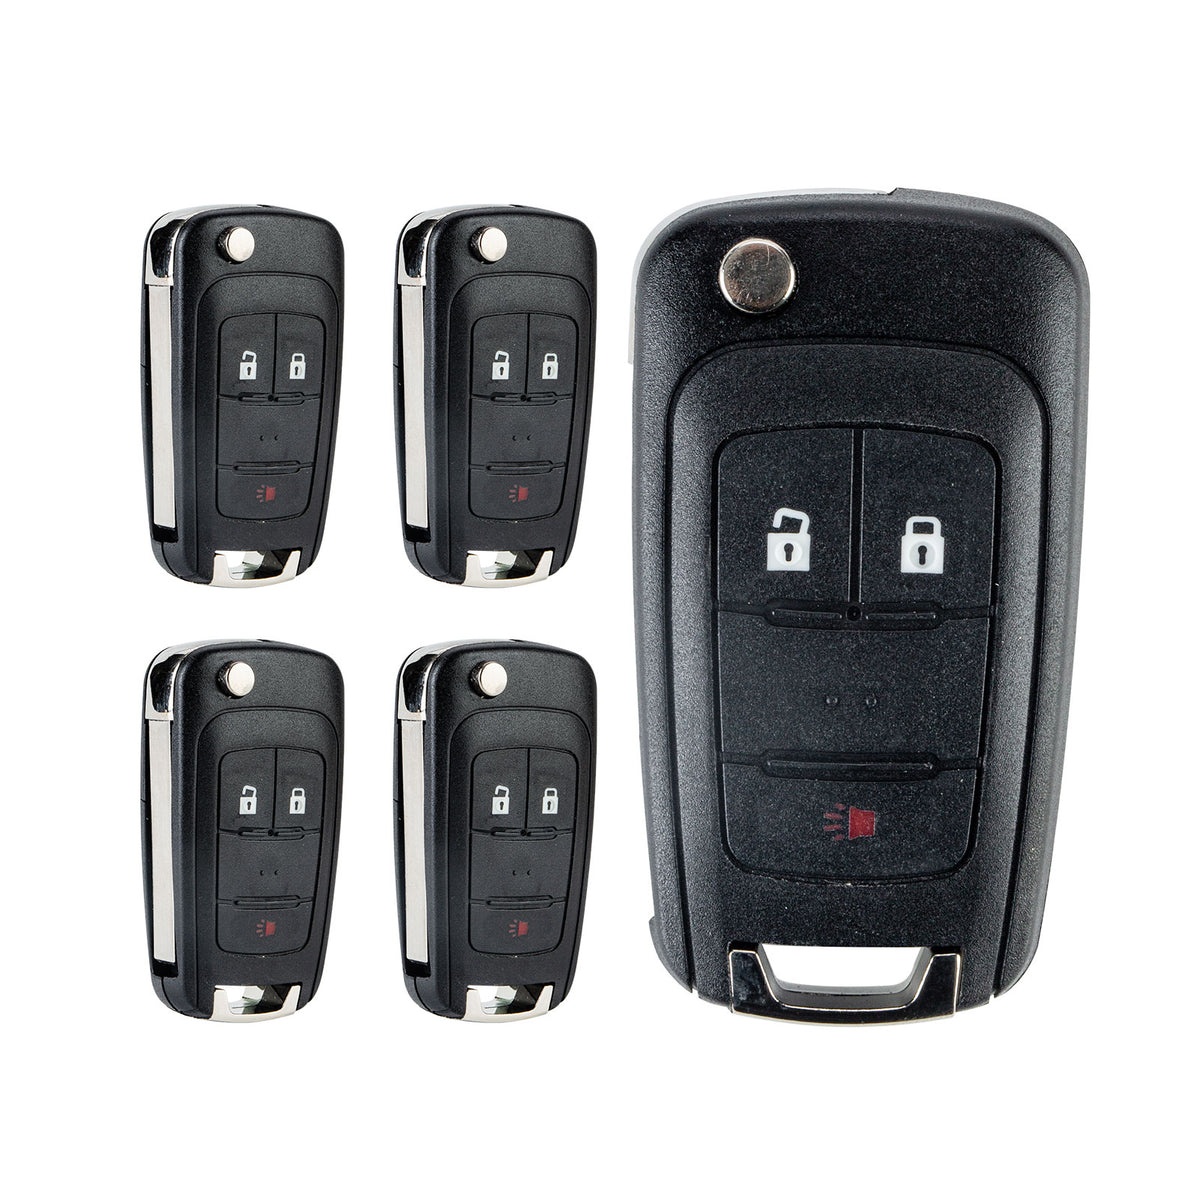 Lots of 5 Extra-Partss Remote Car Key Fob Replacement for Chevy OHT01060512 3-btn fits 2010 2011 2012 2013 2014 2015 2016 2017 Equinox Terrain